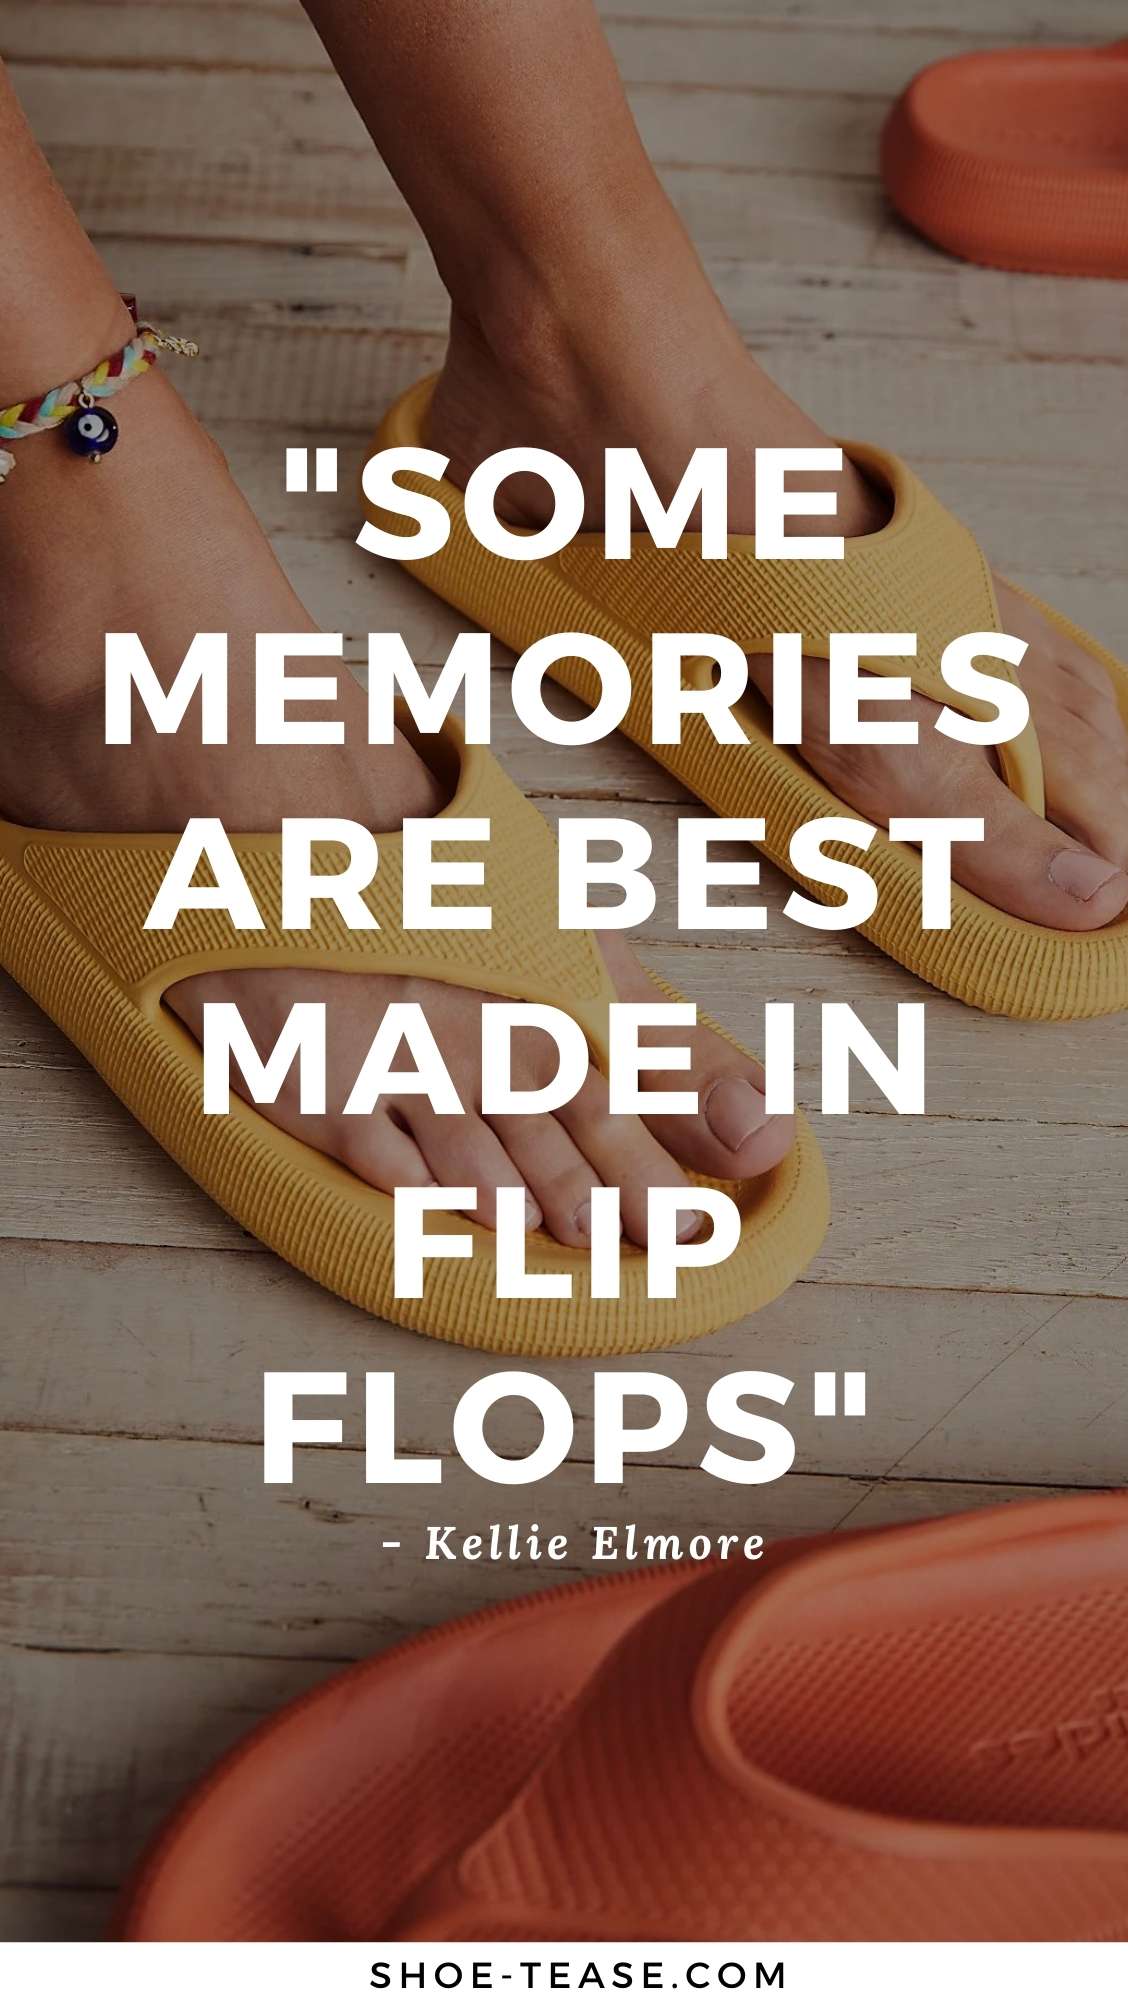 Flip flop quote reading some memories are best made in flip flops.